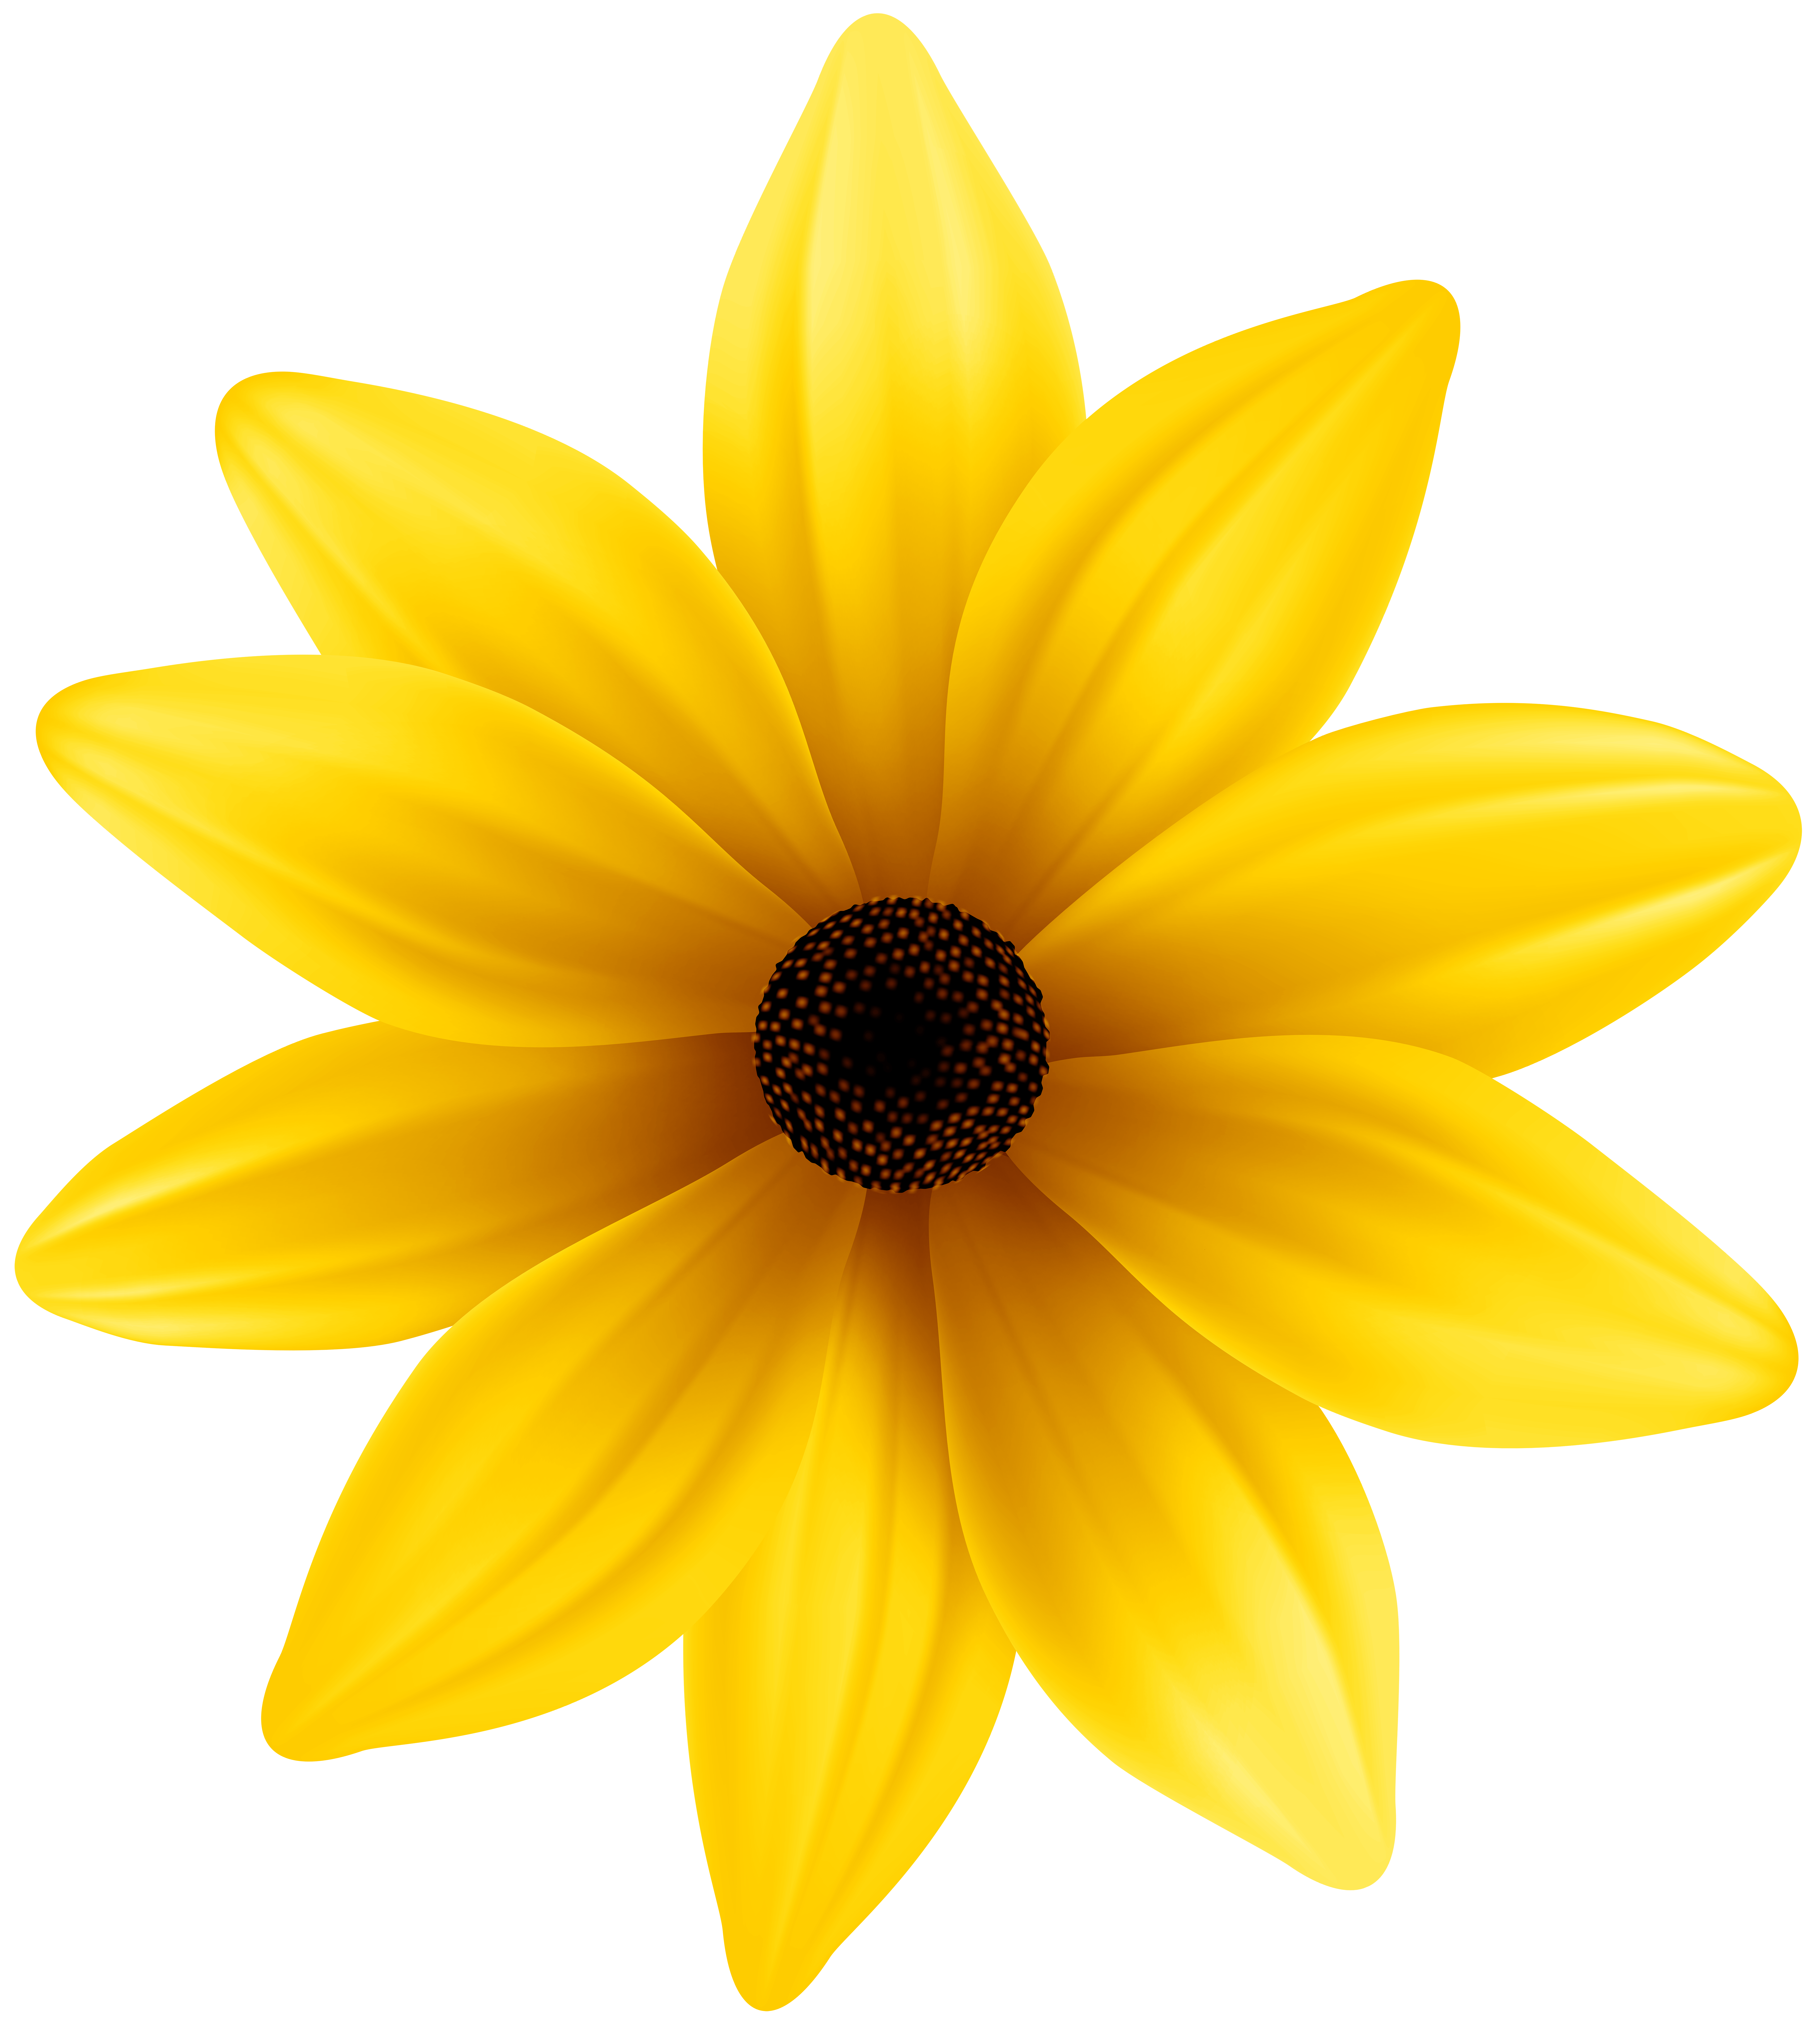 Flower Png Images Free Download - pic-future